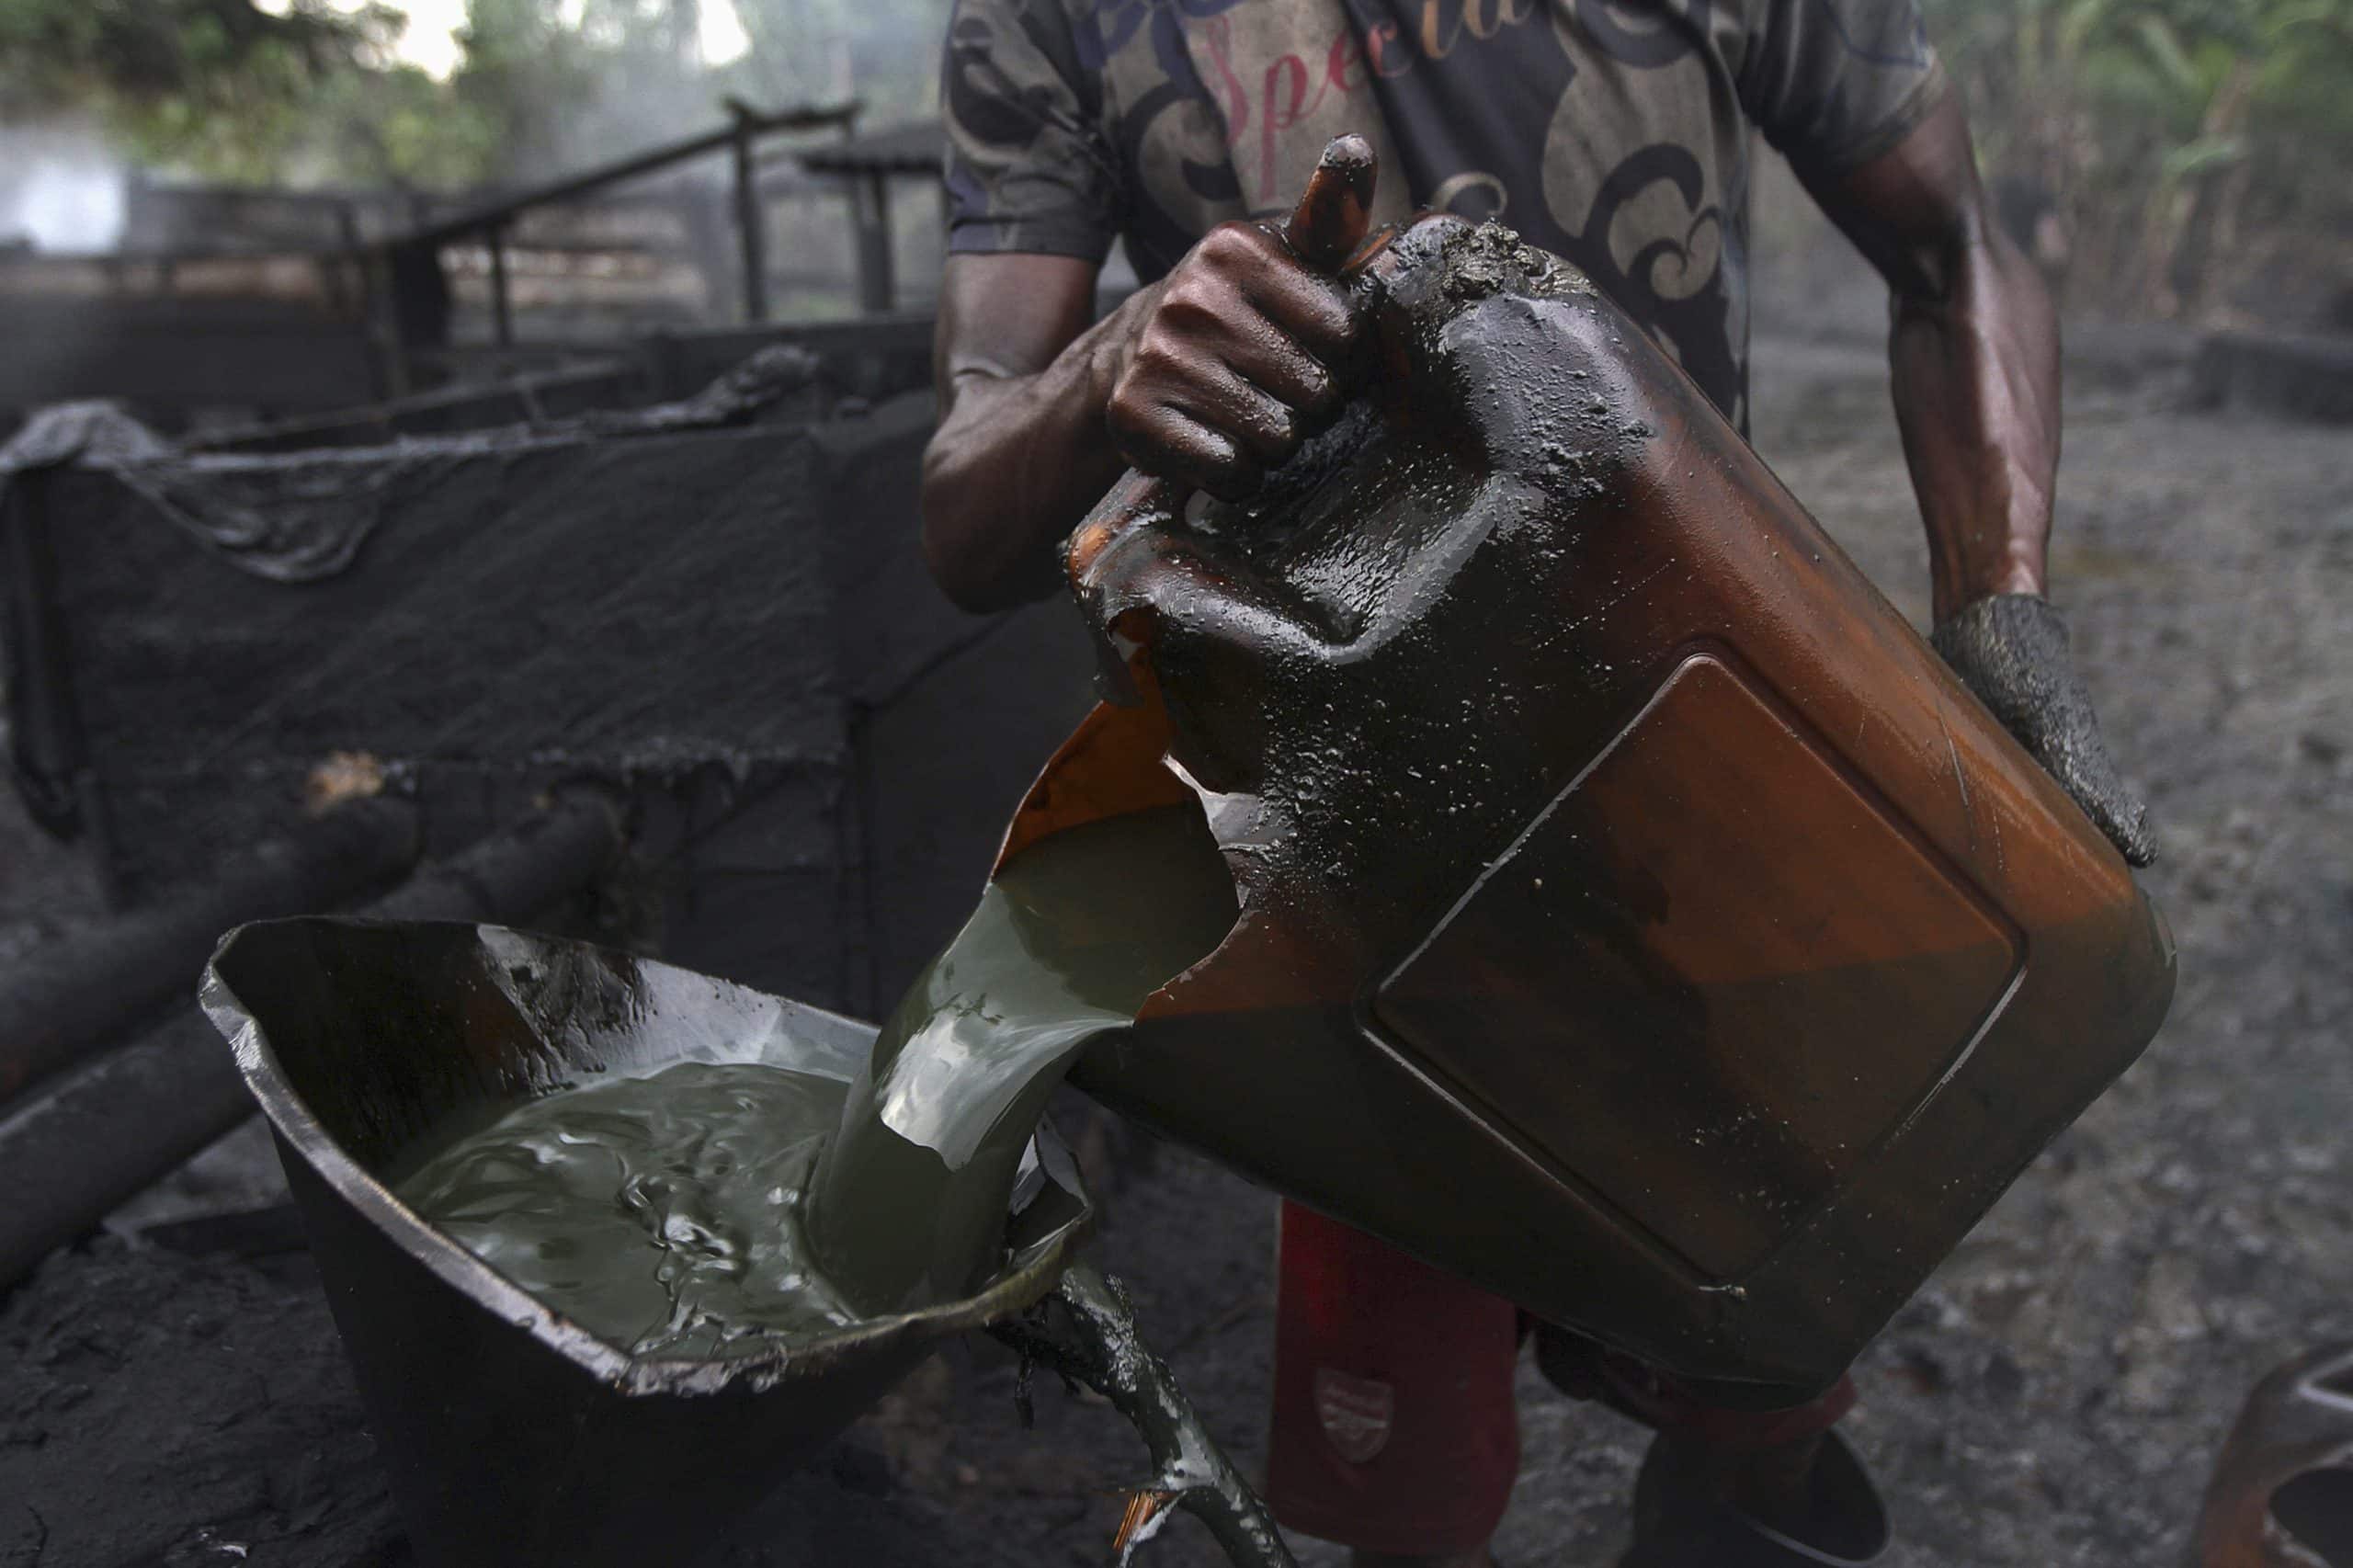 Again, Northern State Discovers Crude Oil In Its Communities